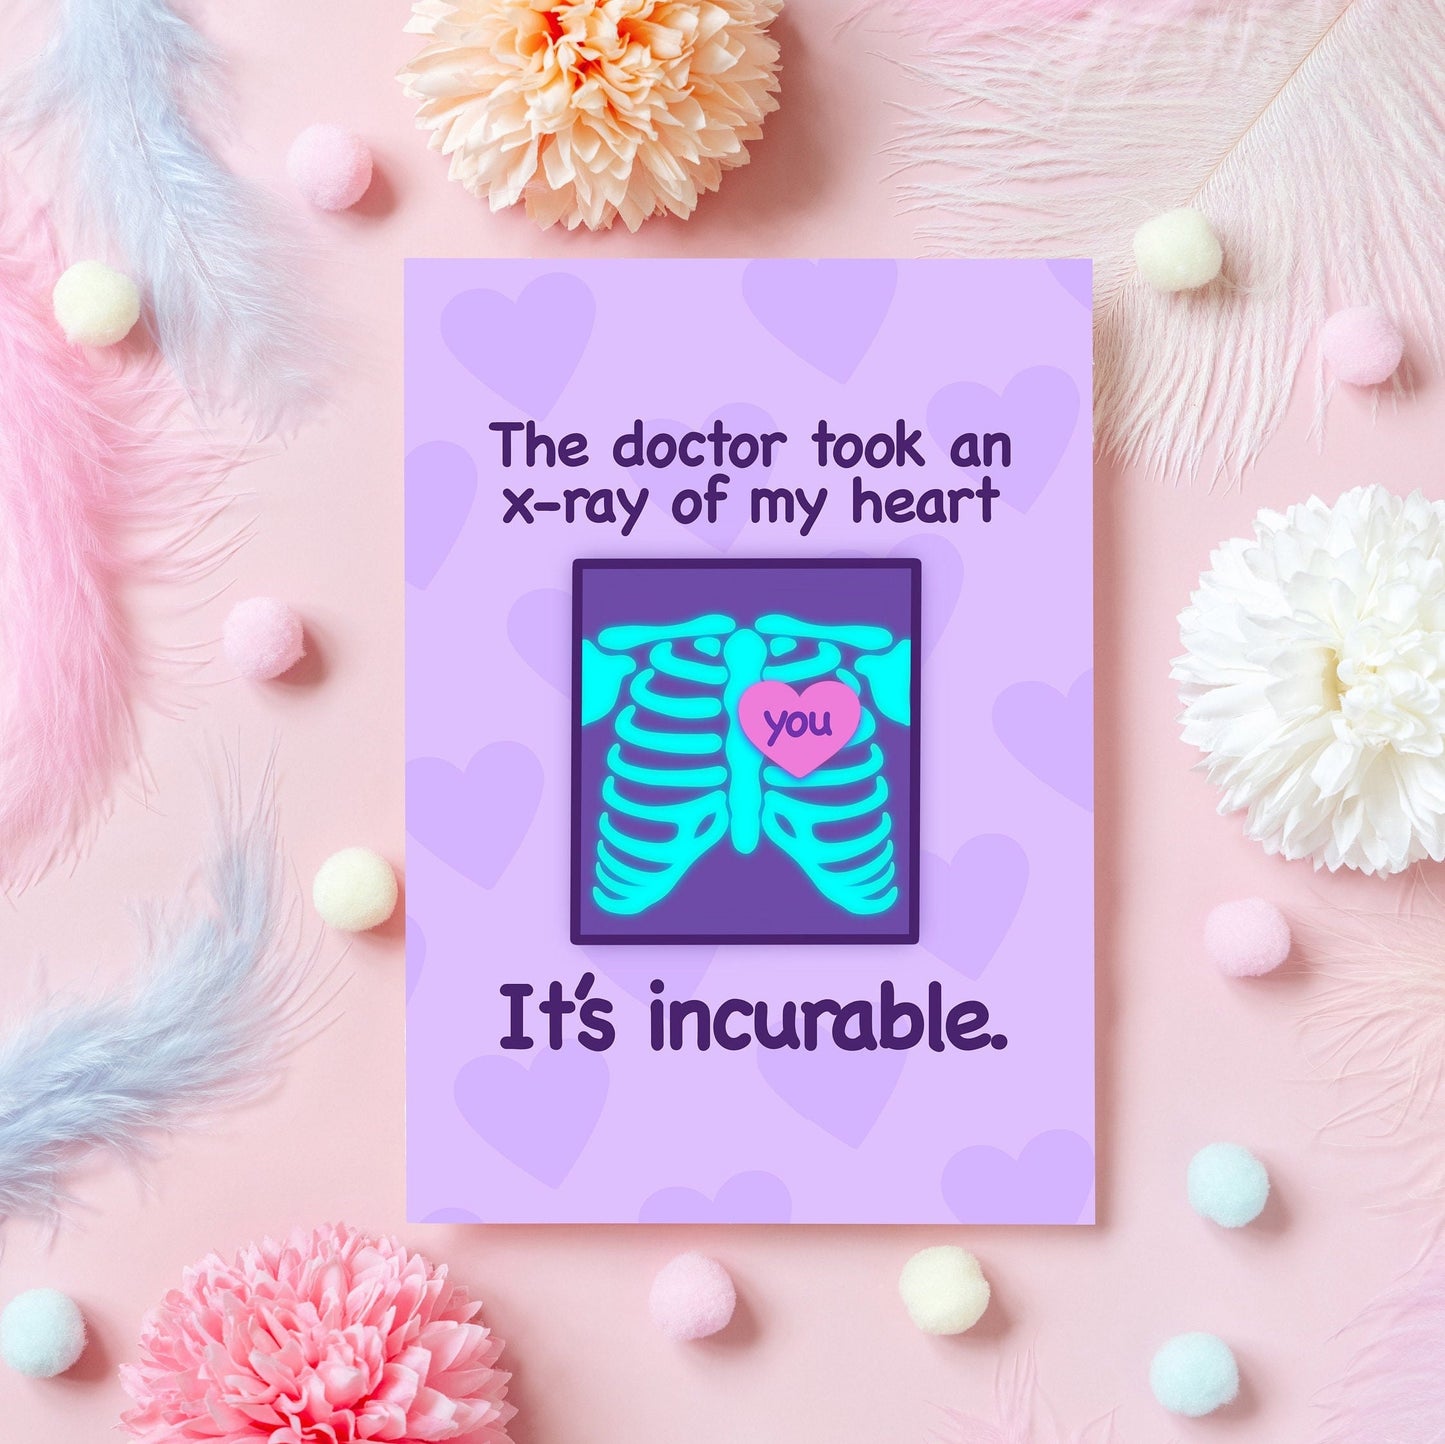 Funny Anniversary Card | The Doctor Took an X-ray of My Heart | Wholesome & Heartfelt Anniversary/Just Because Love Card For Her or Him